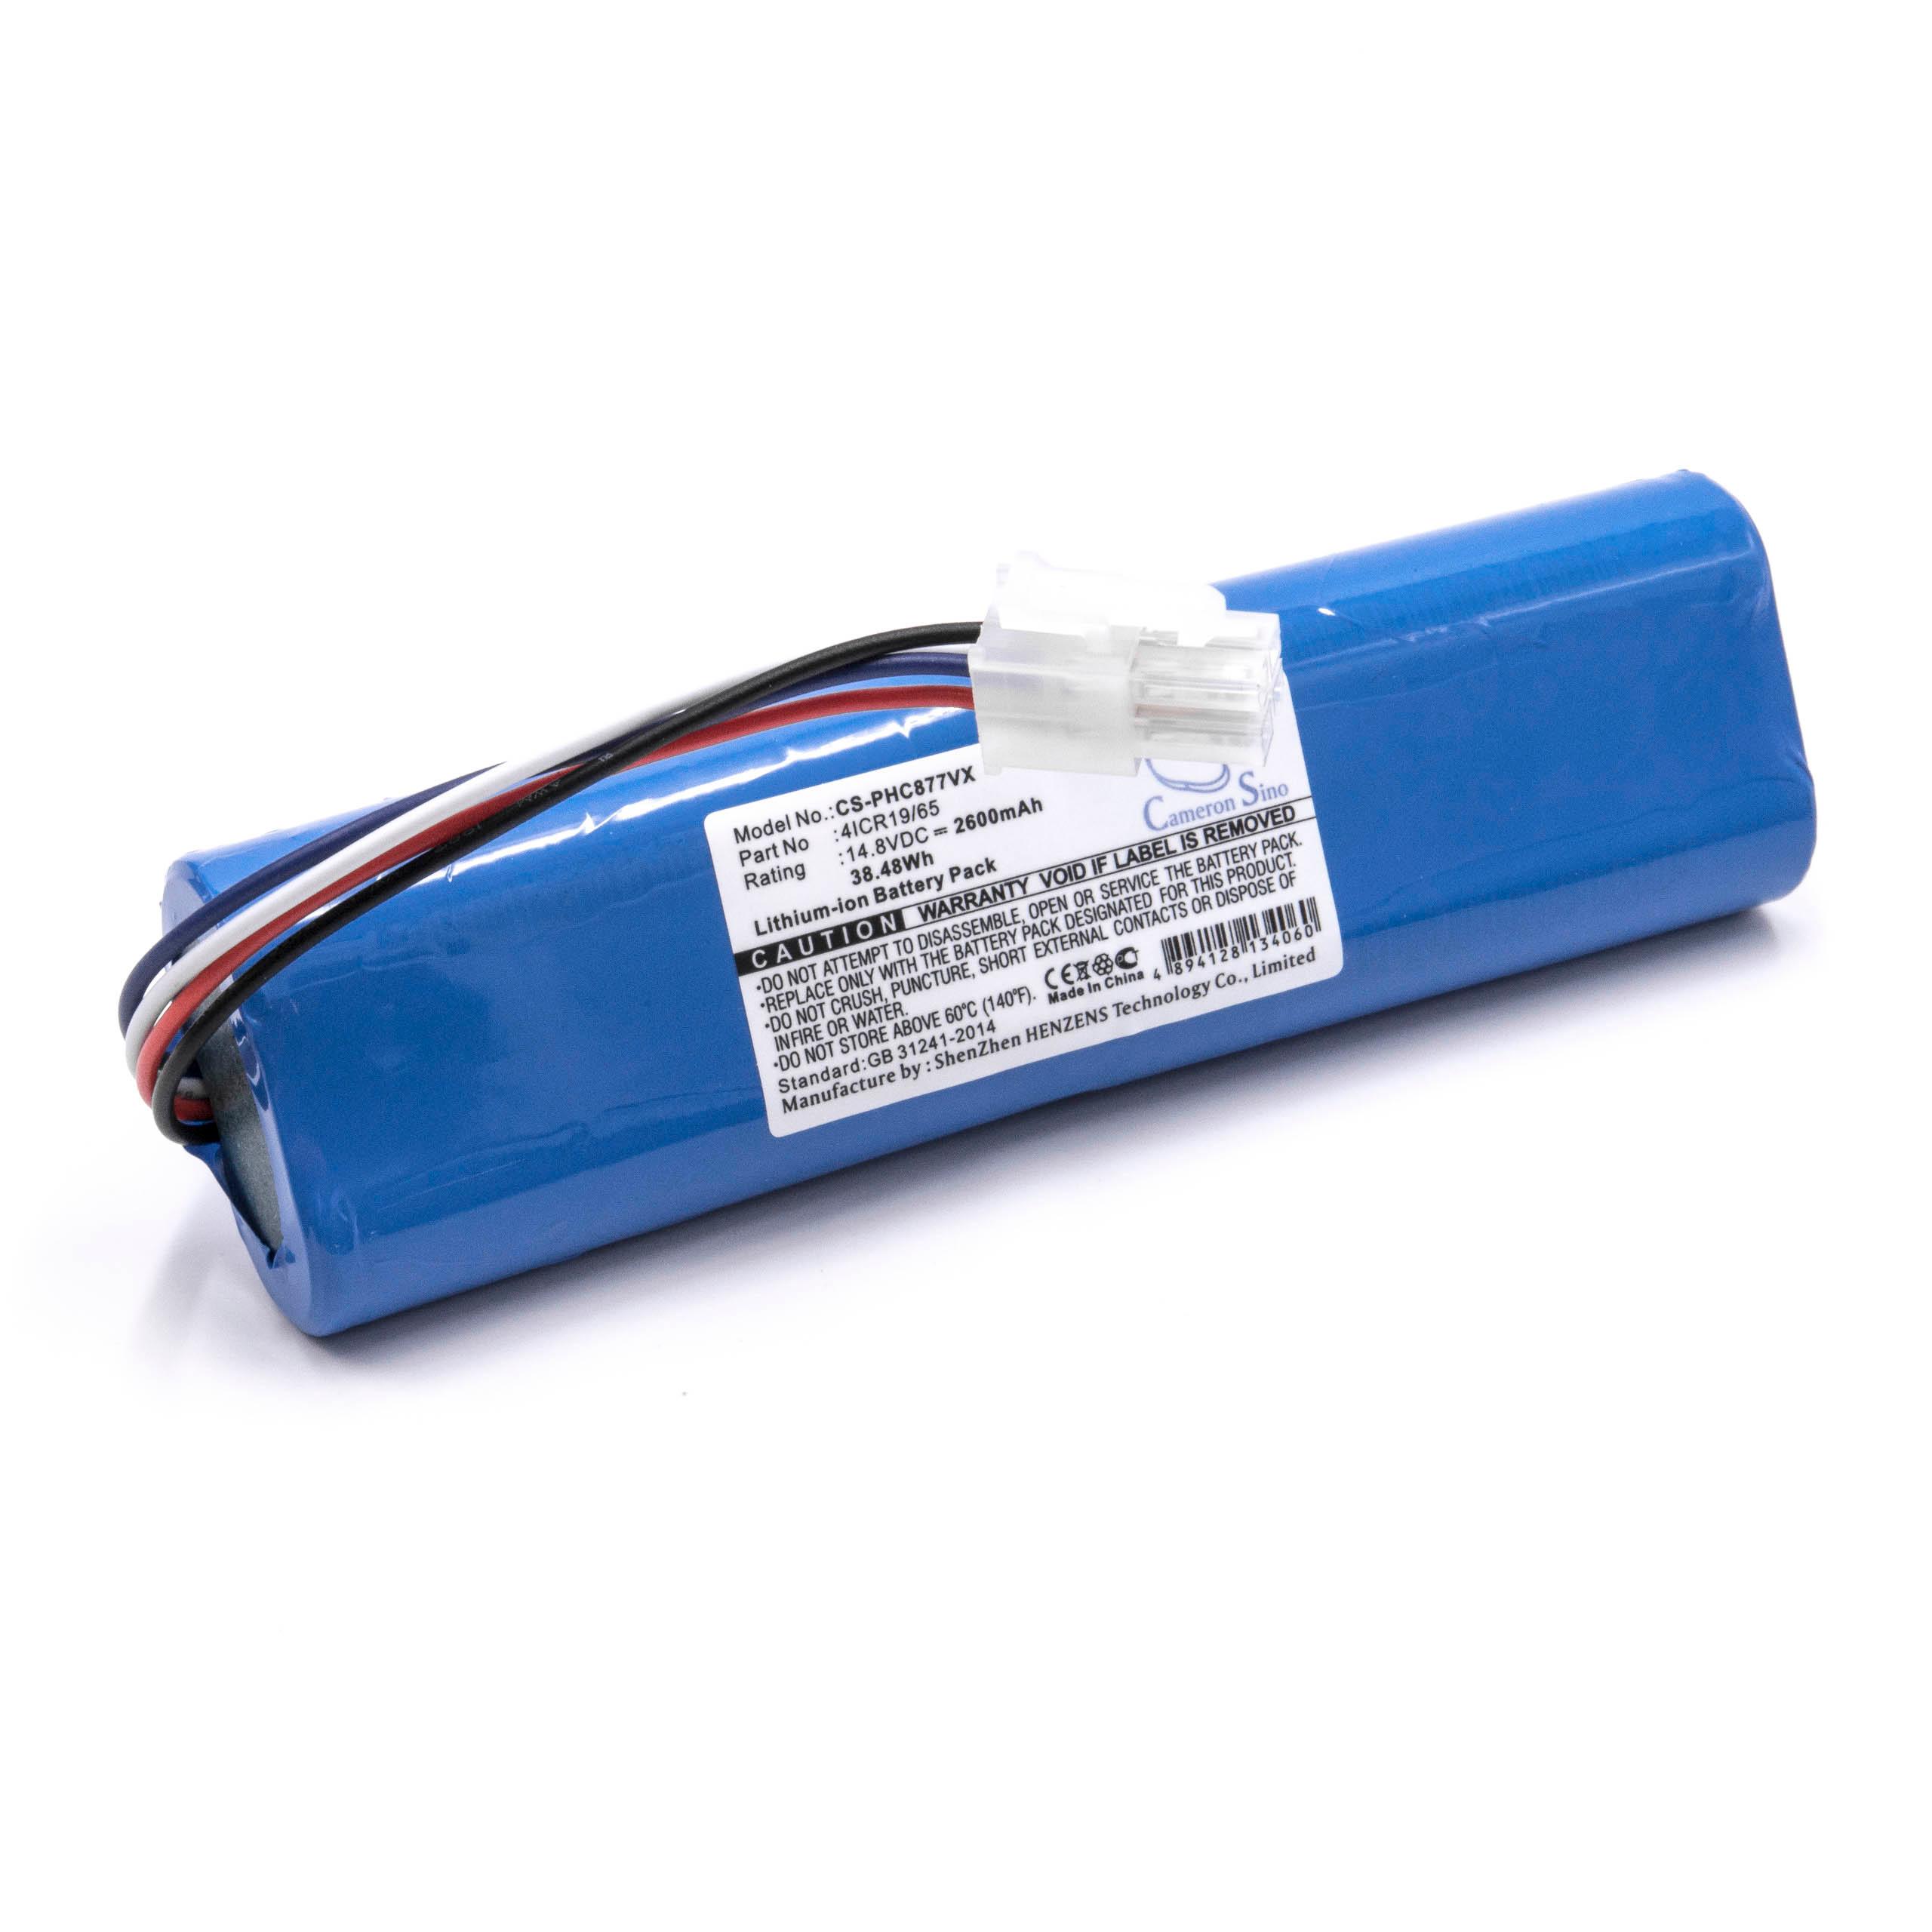 Battery Replacement for Philips 4ICR19/65, CP0111/01 for - 2600mAh, 14.8V, Li-Ion